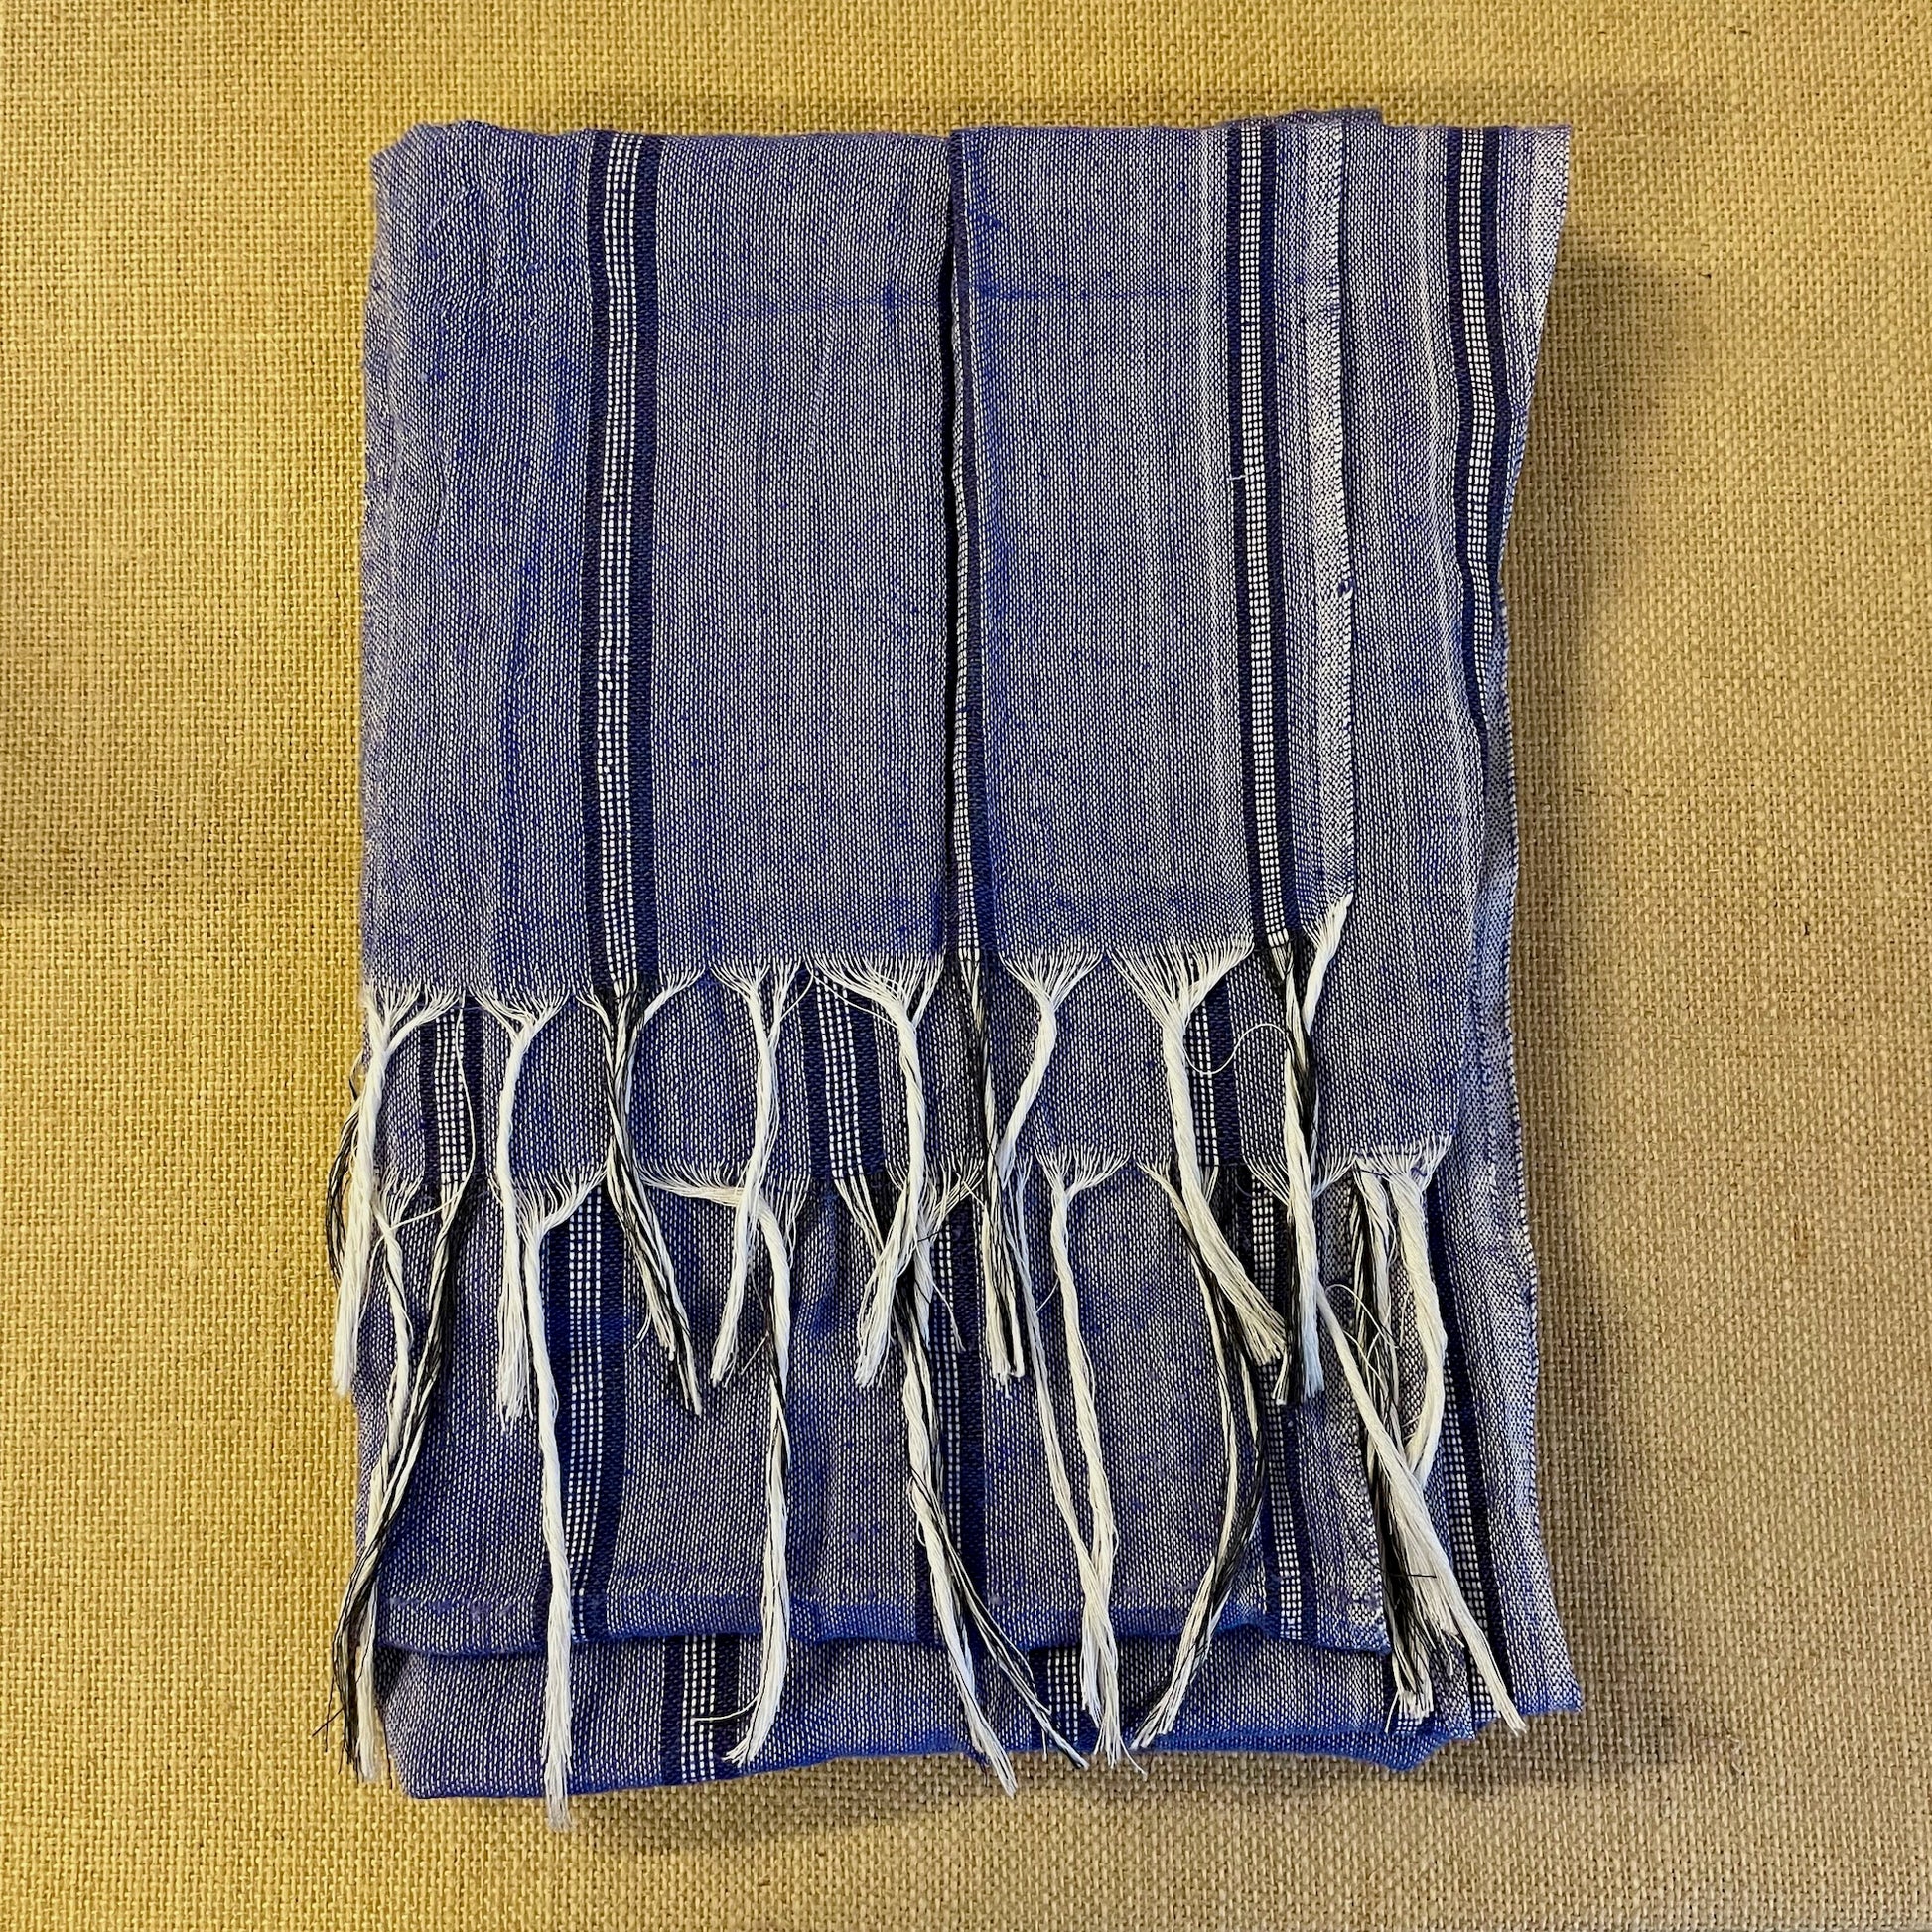 Handwoven Long Blue Striped Cactus Silk Scarf folded